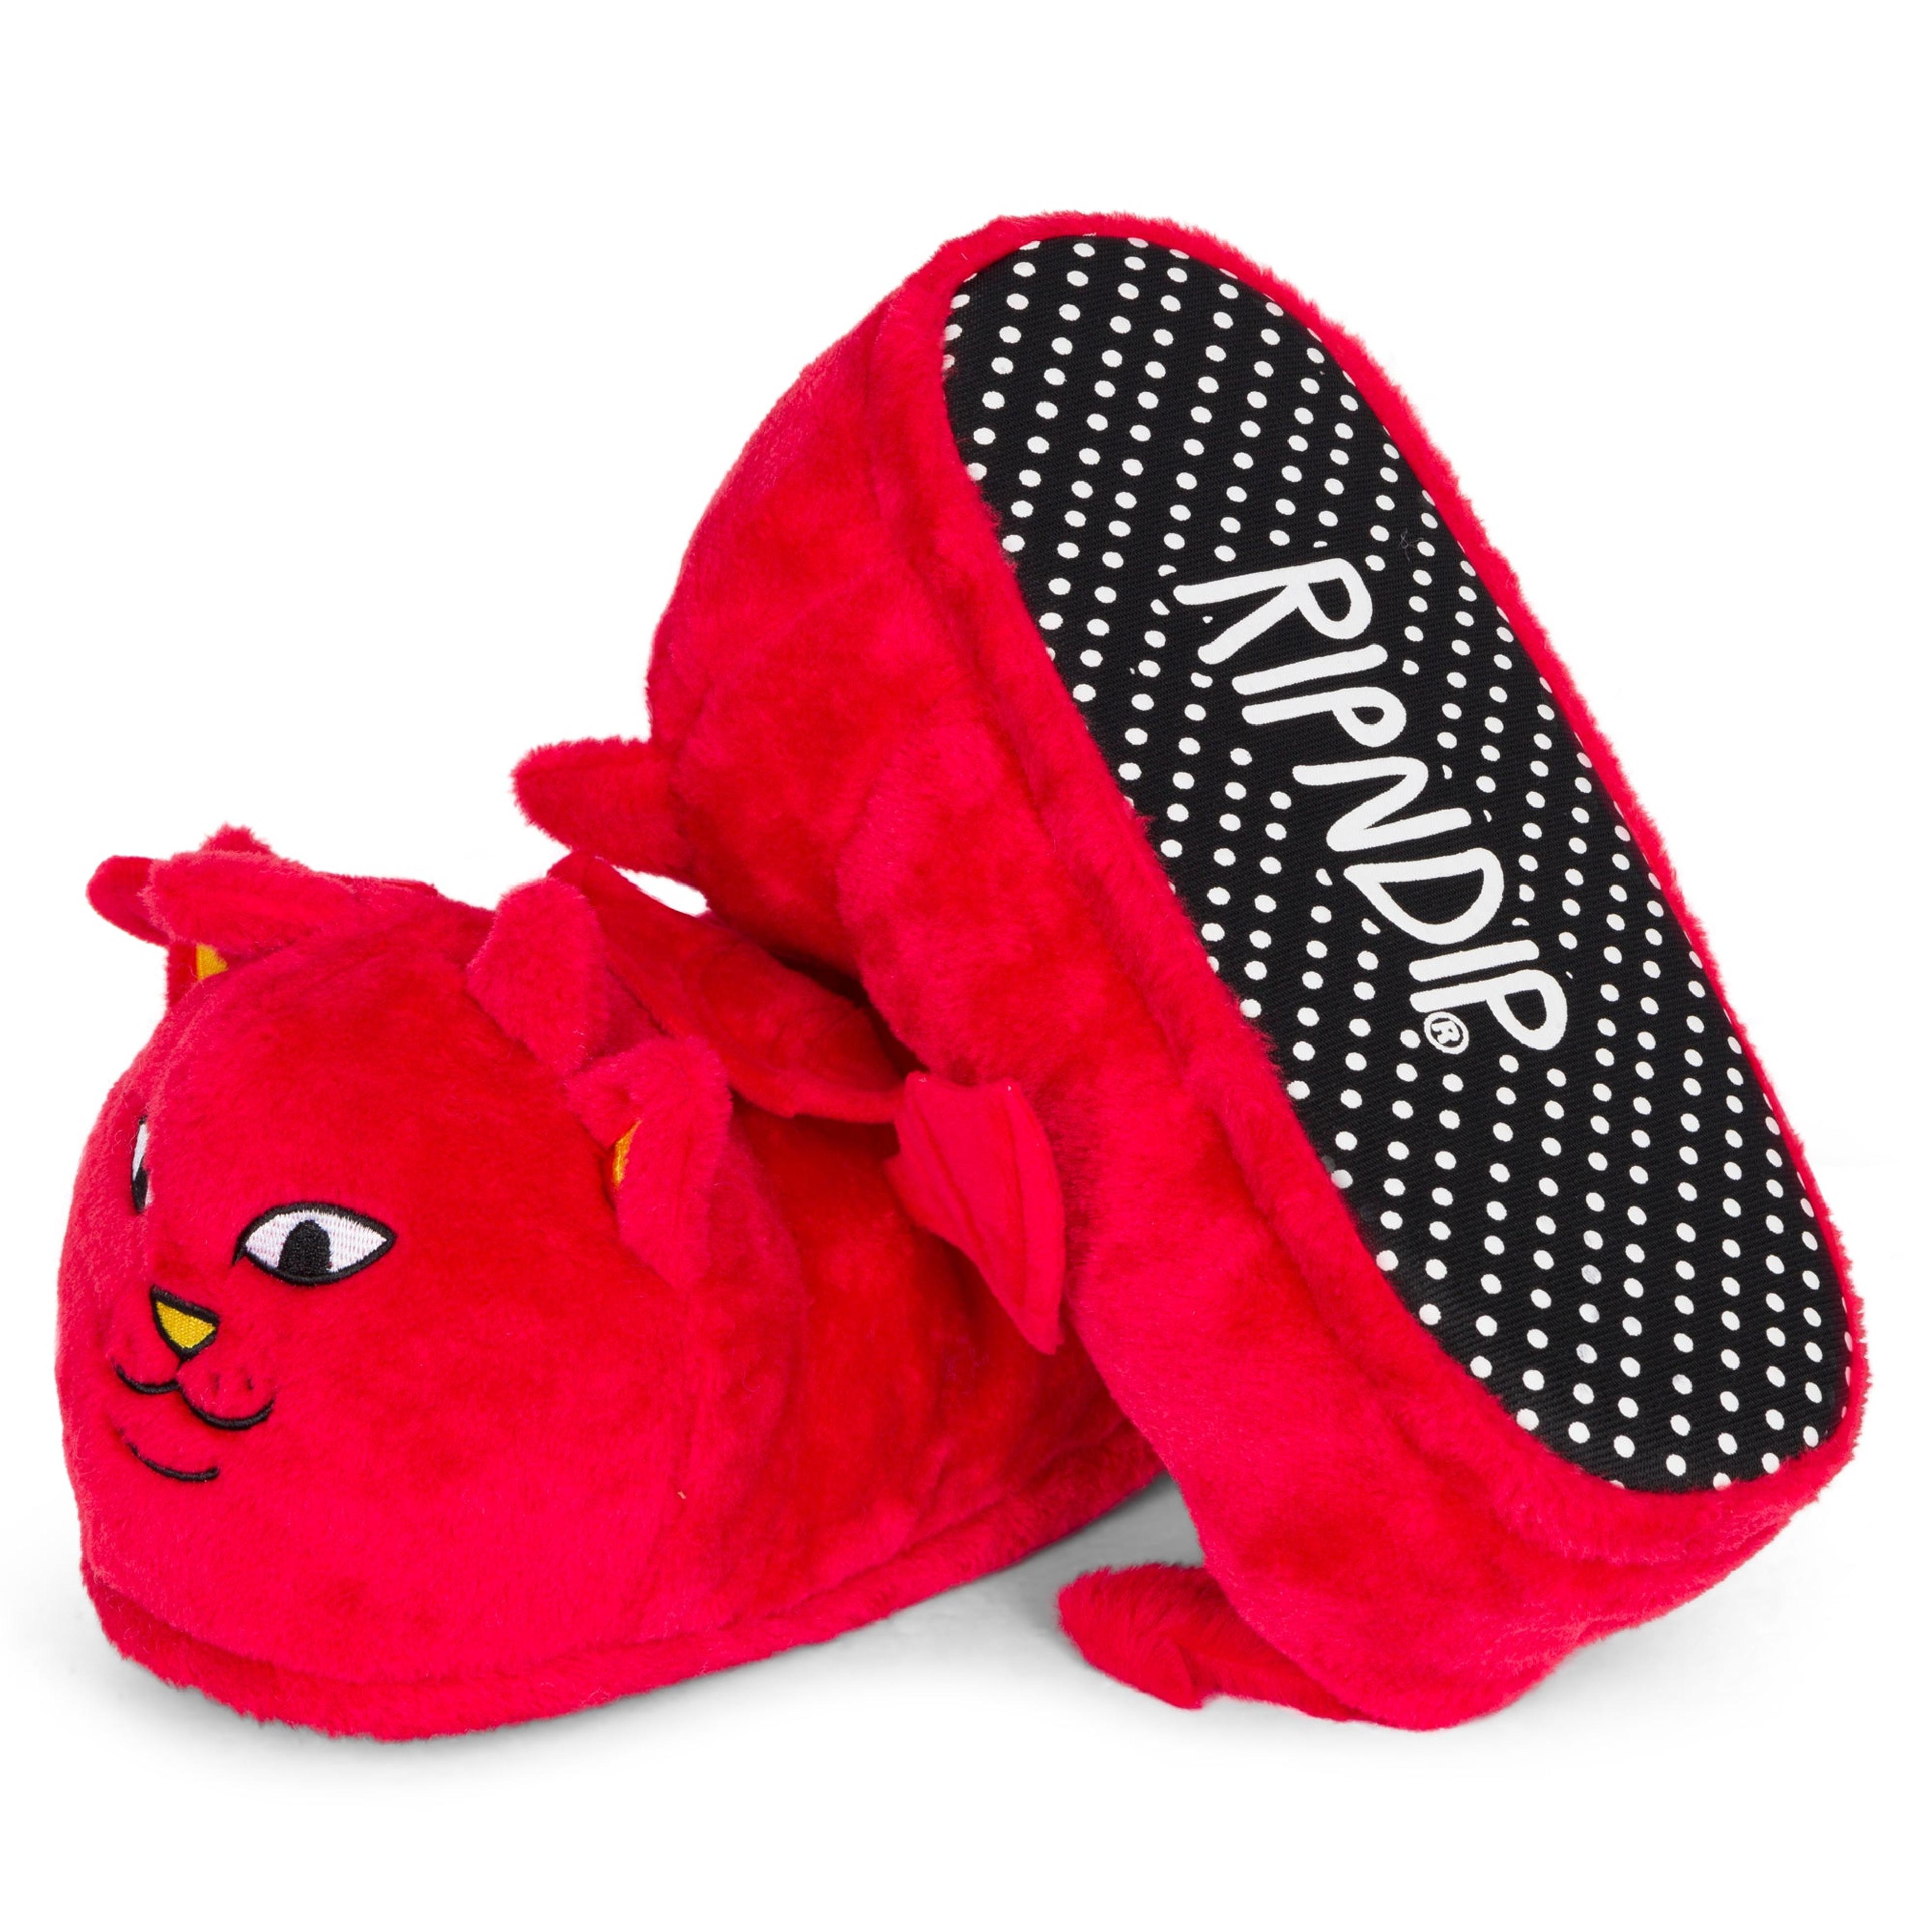 Alternate View 3 of Lord Devil Plush Slippers (Red)